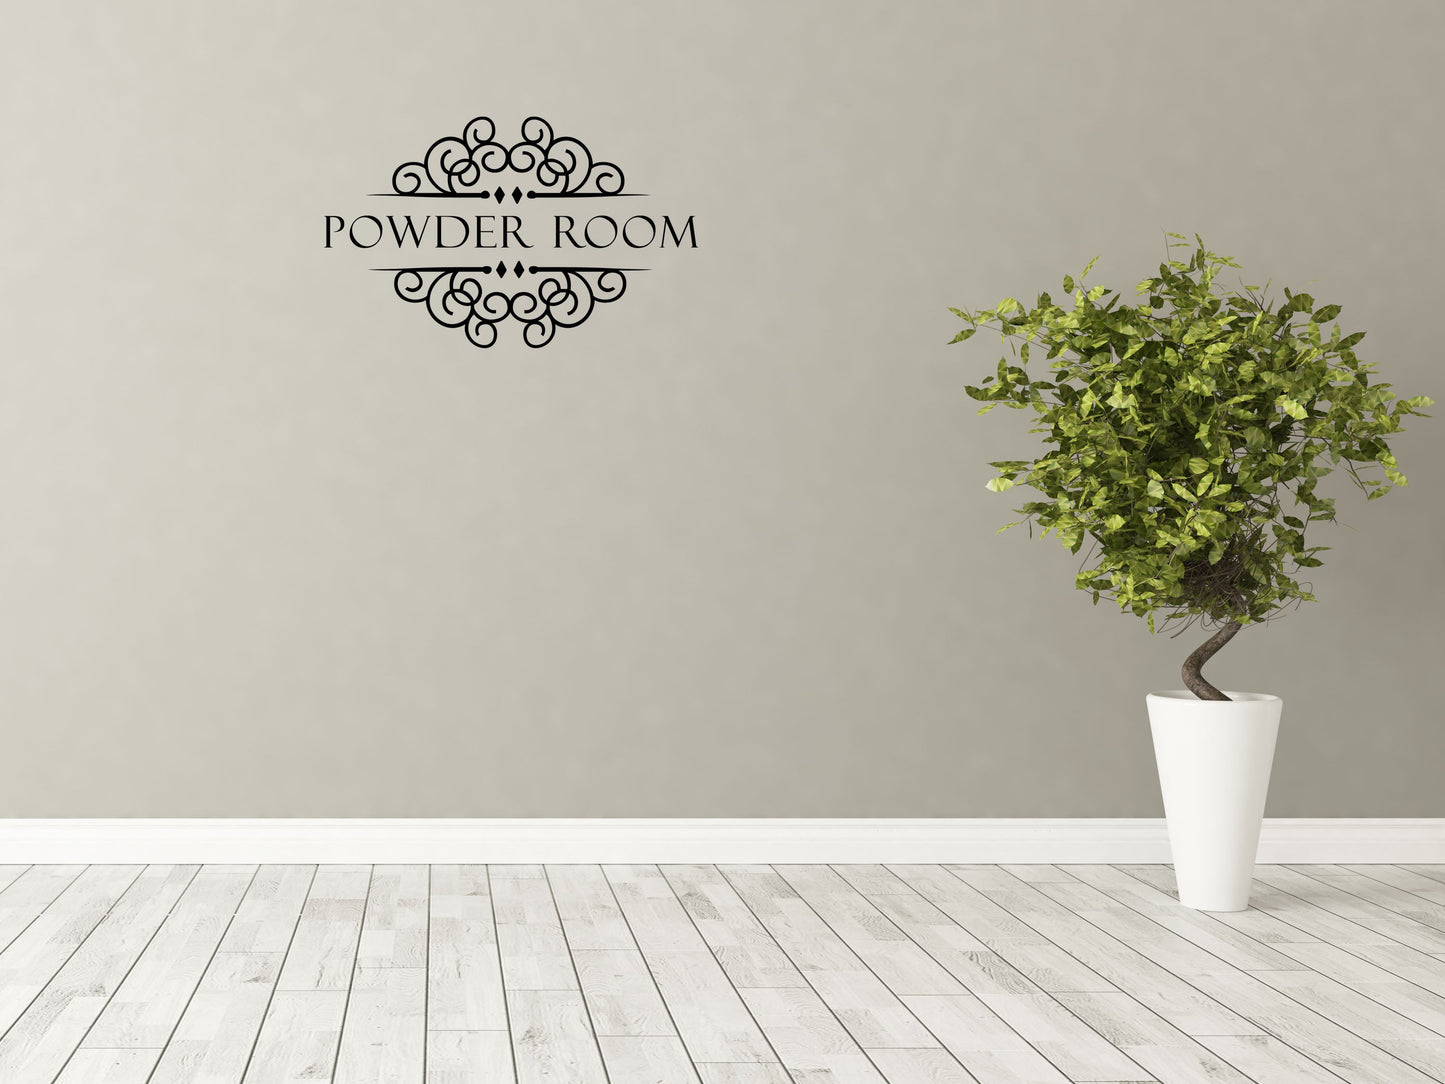 Powder Room Decal Wall Sign For Bathroom - Restroom Wall Art Vinyl Wall Decal Title Done 